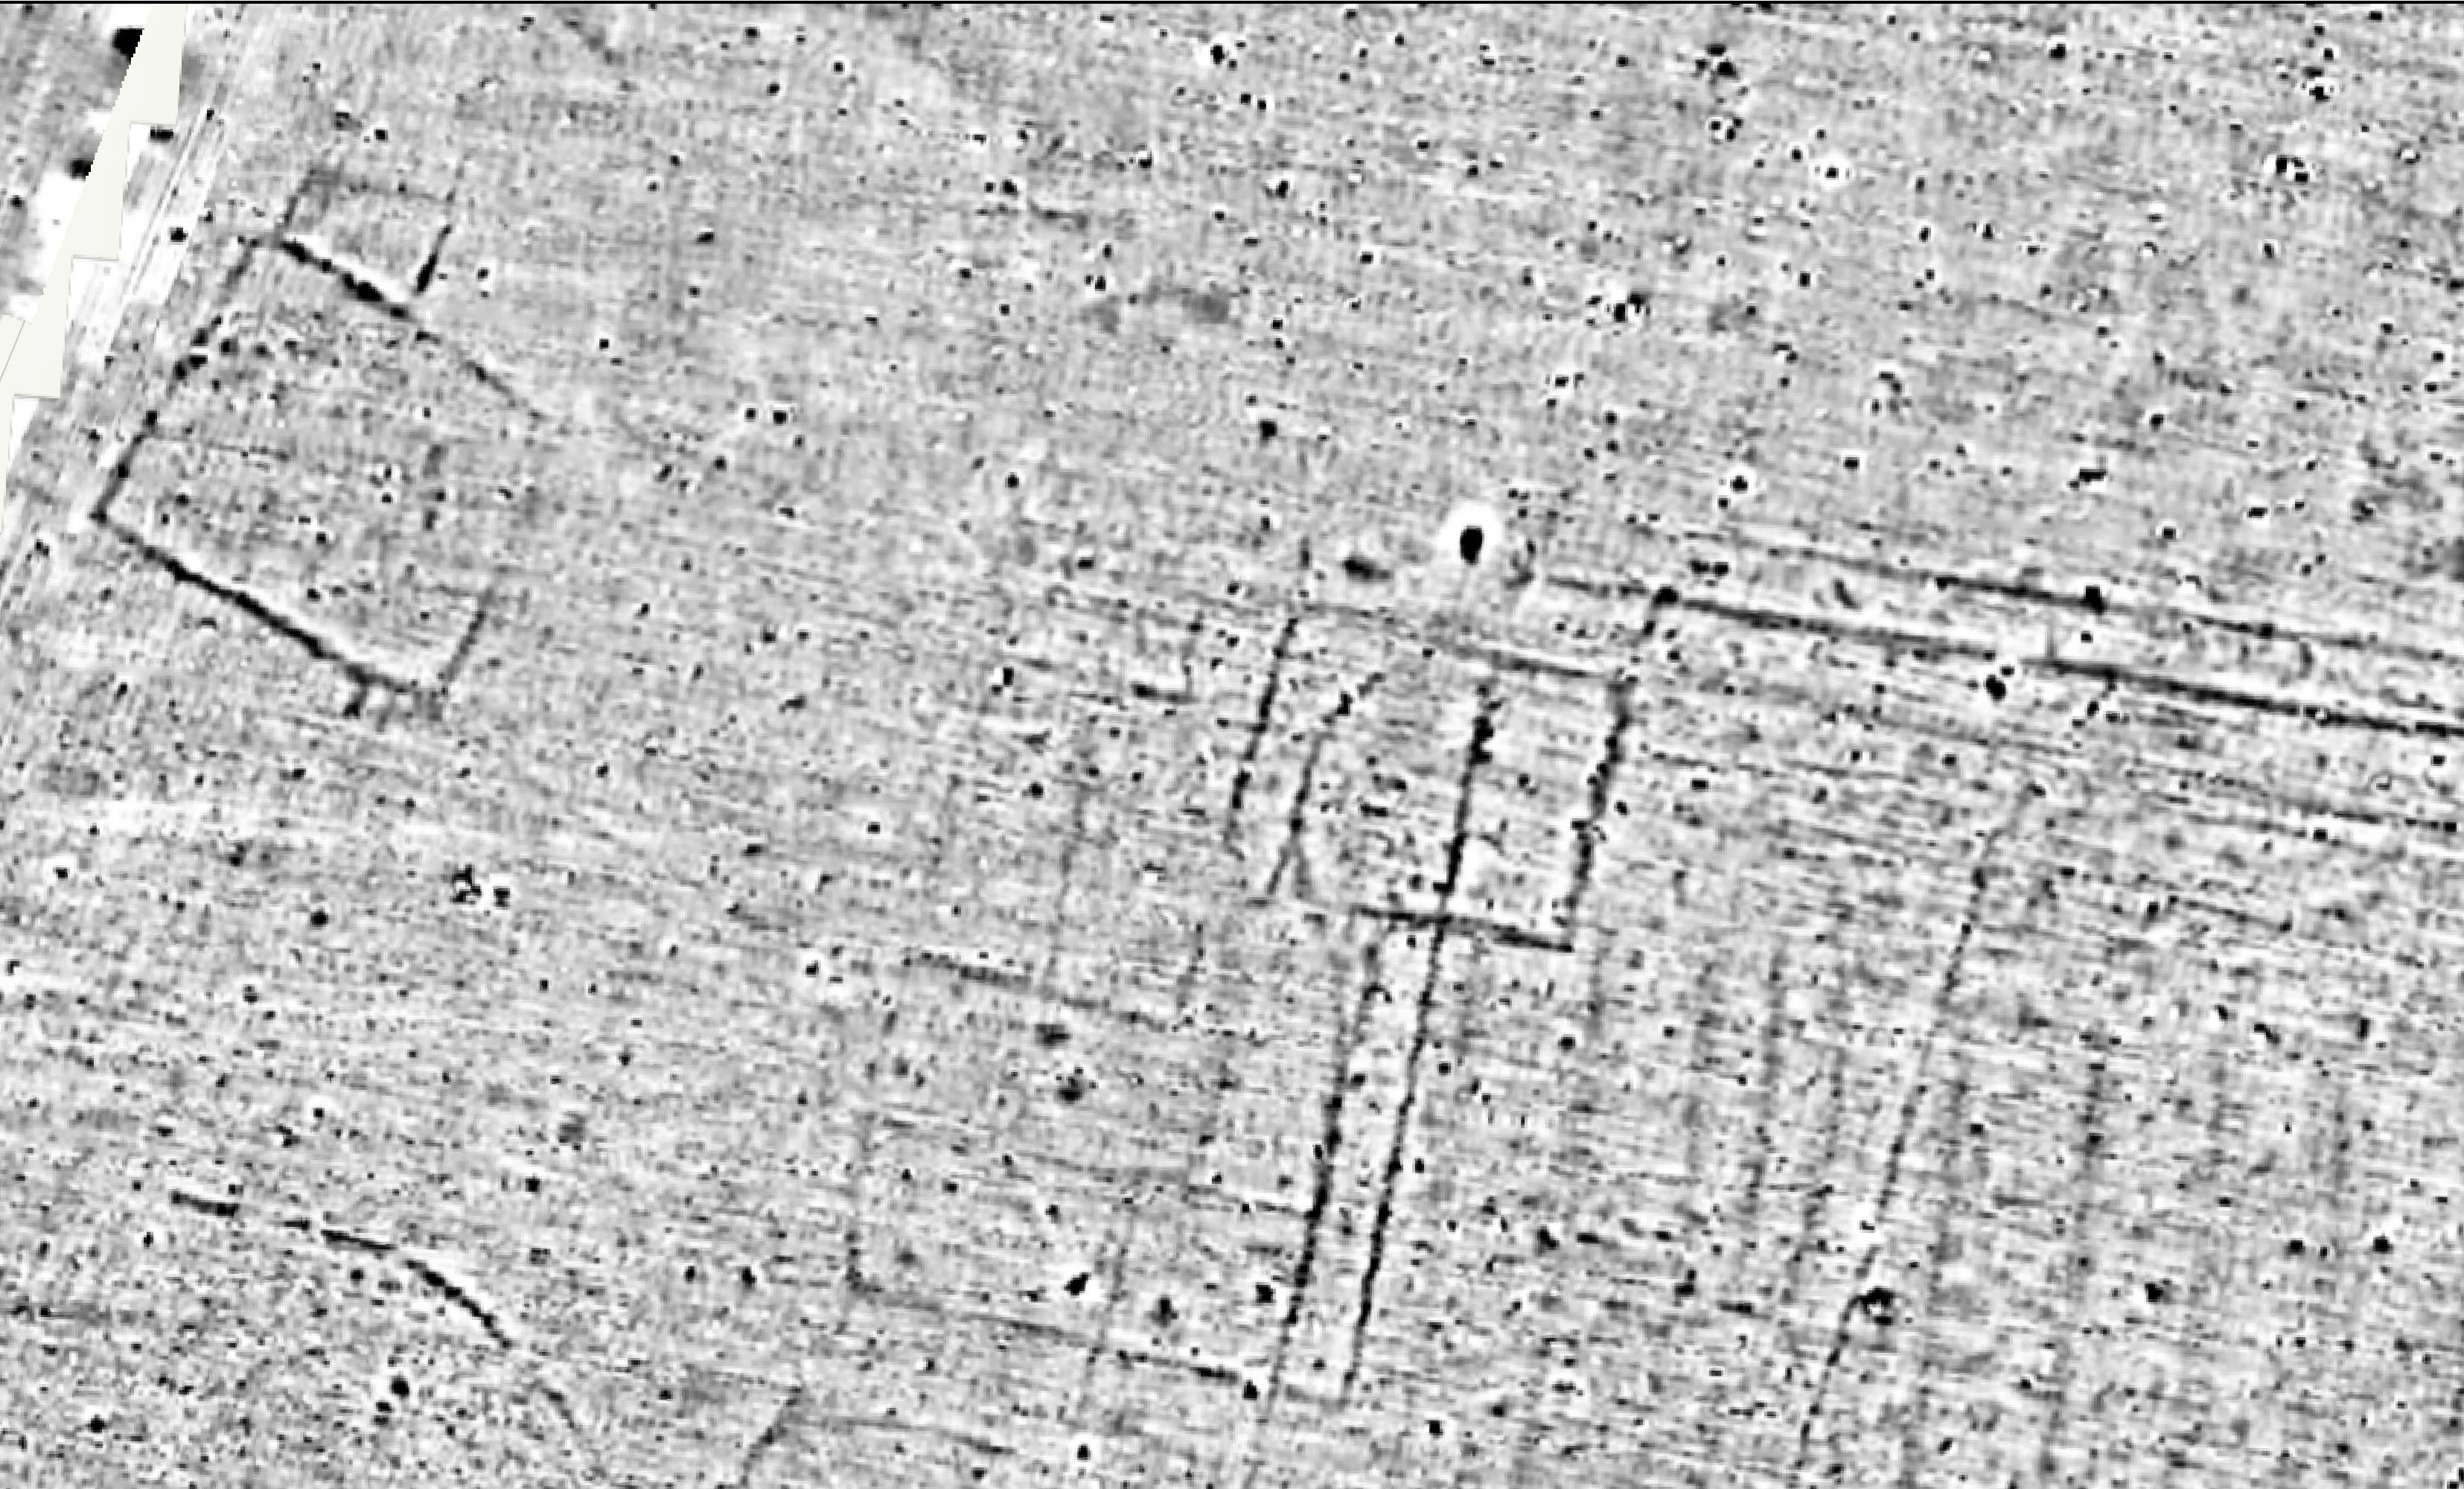 Grey scale geophysics data showing the site of possible Roman villa